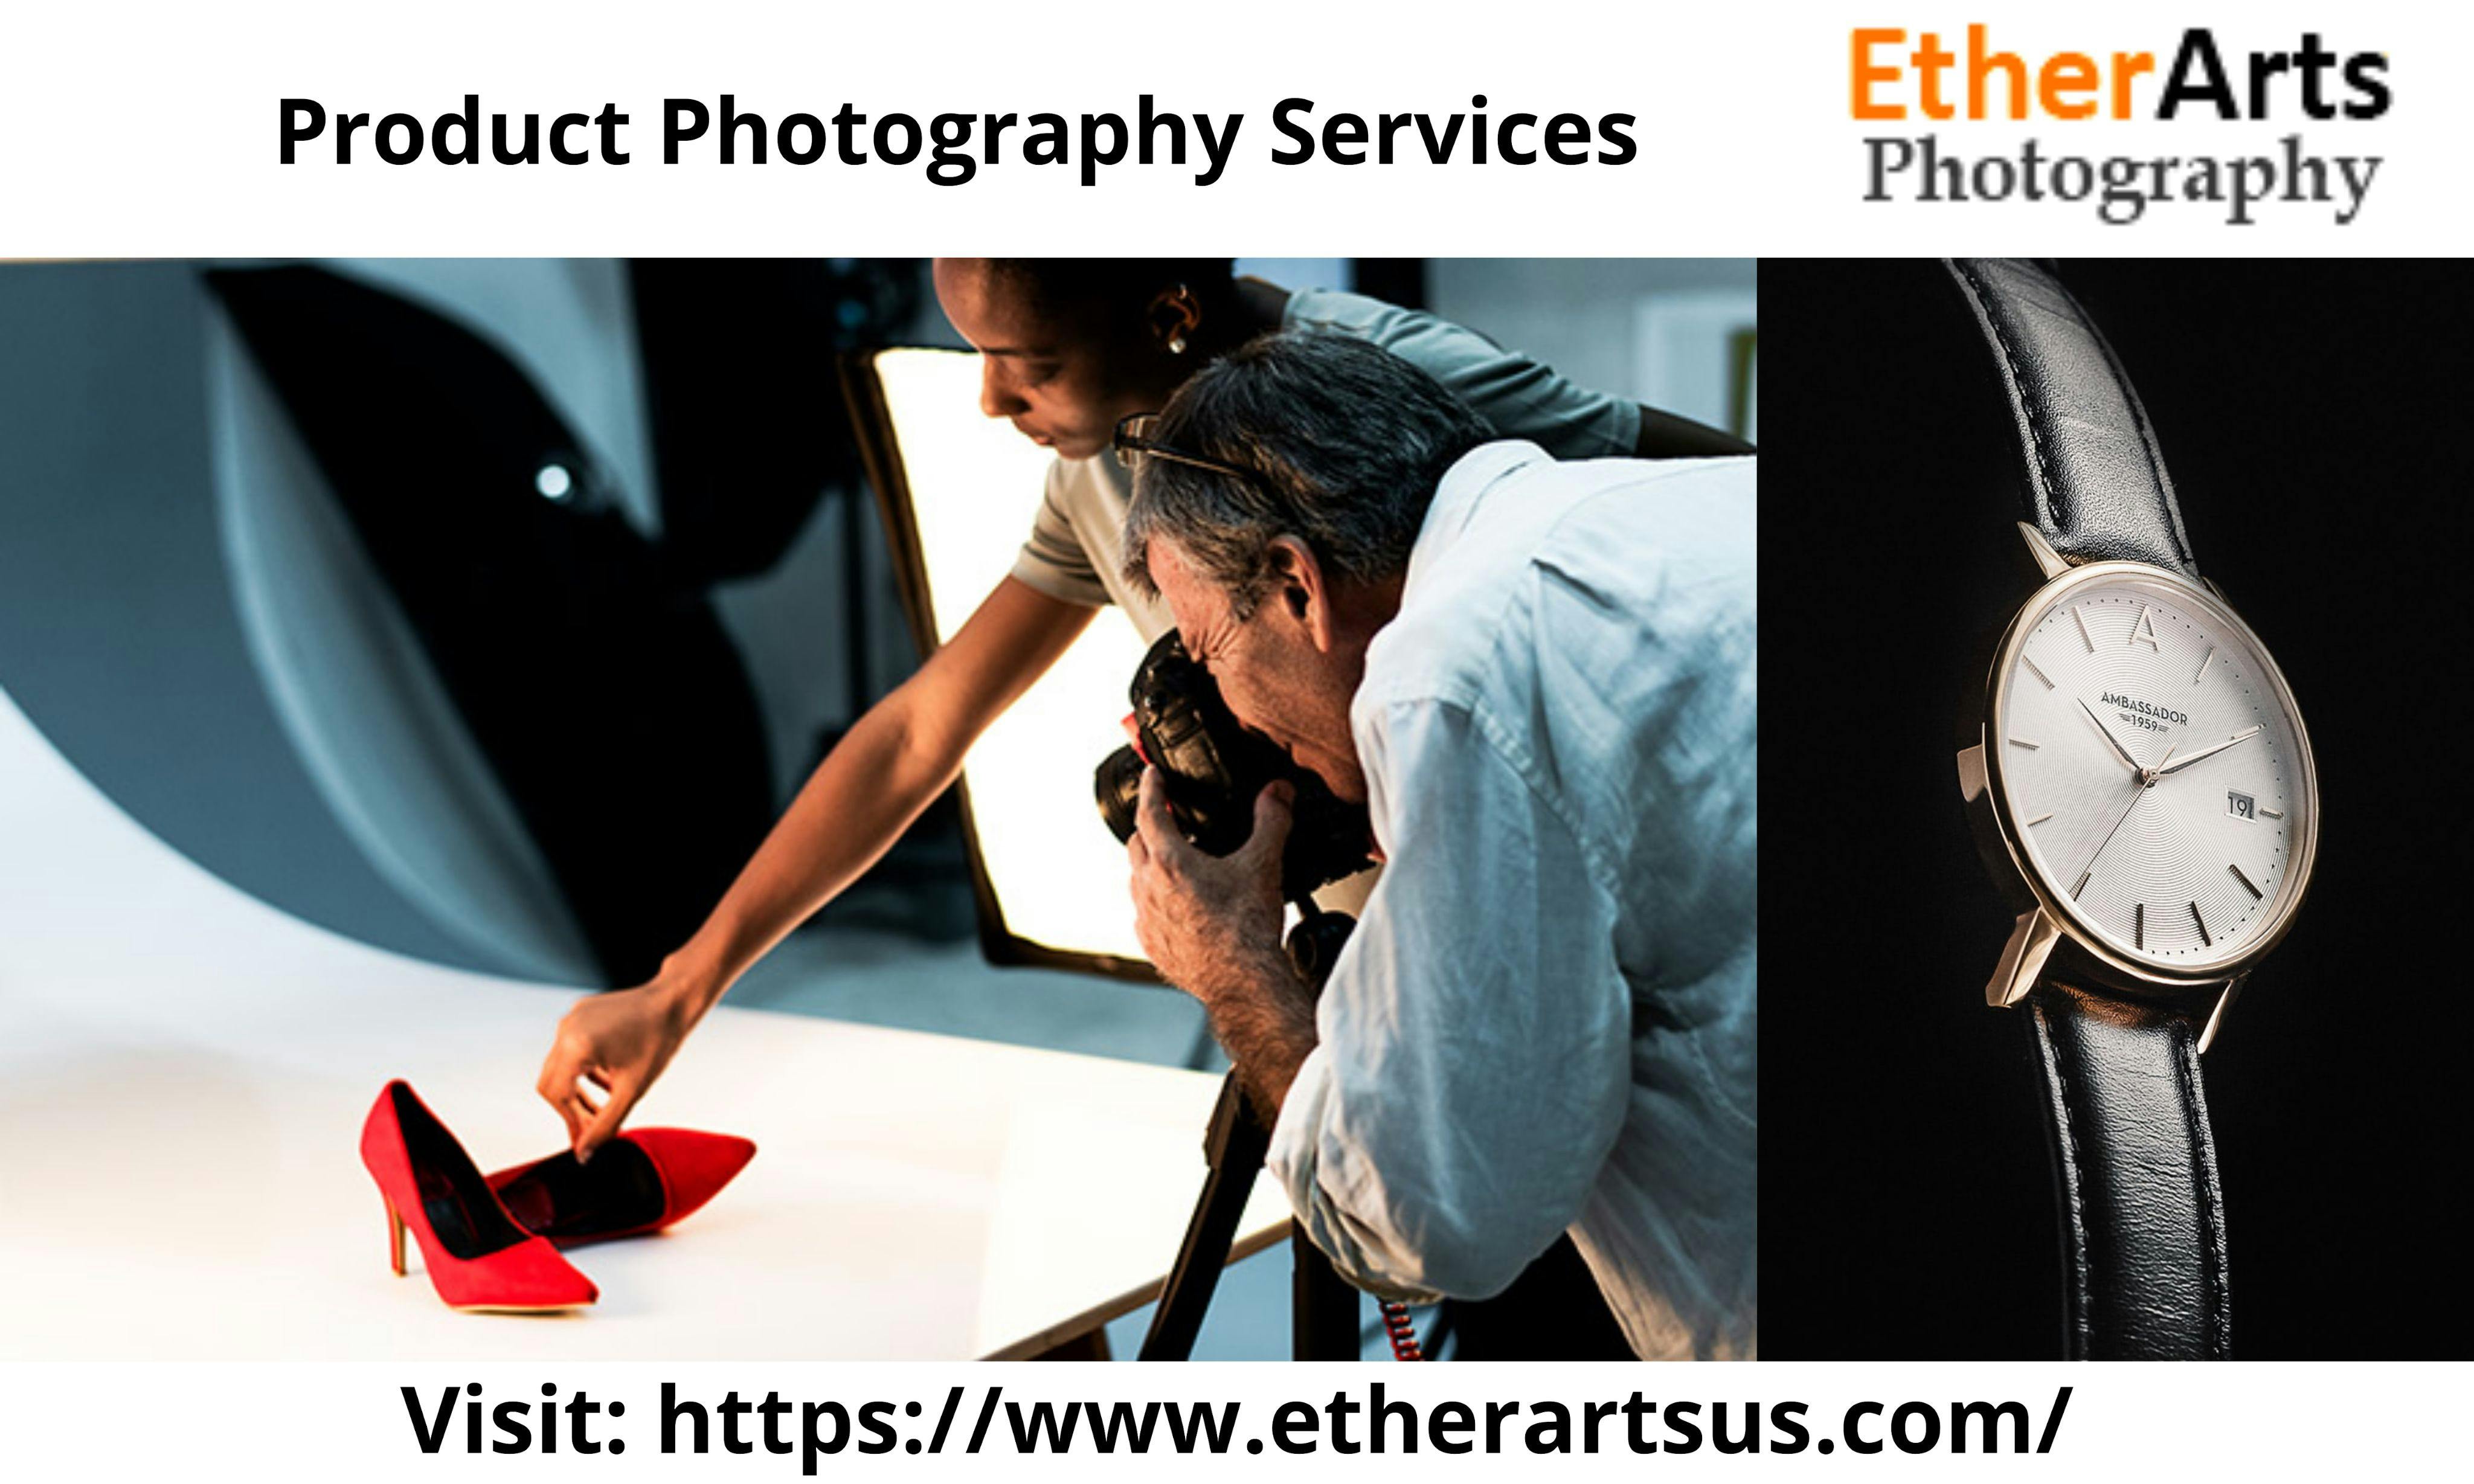 Cheap Product Photography Service at EtherArts Product Photography.jpg